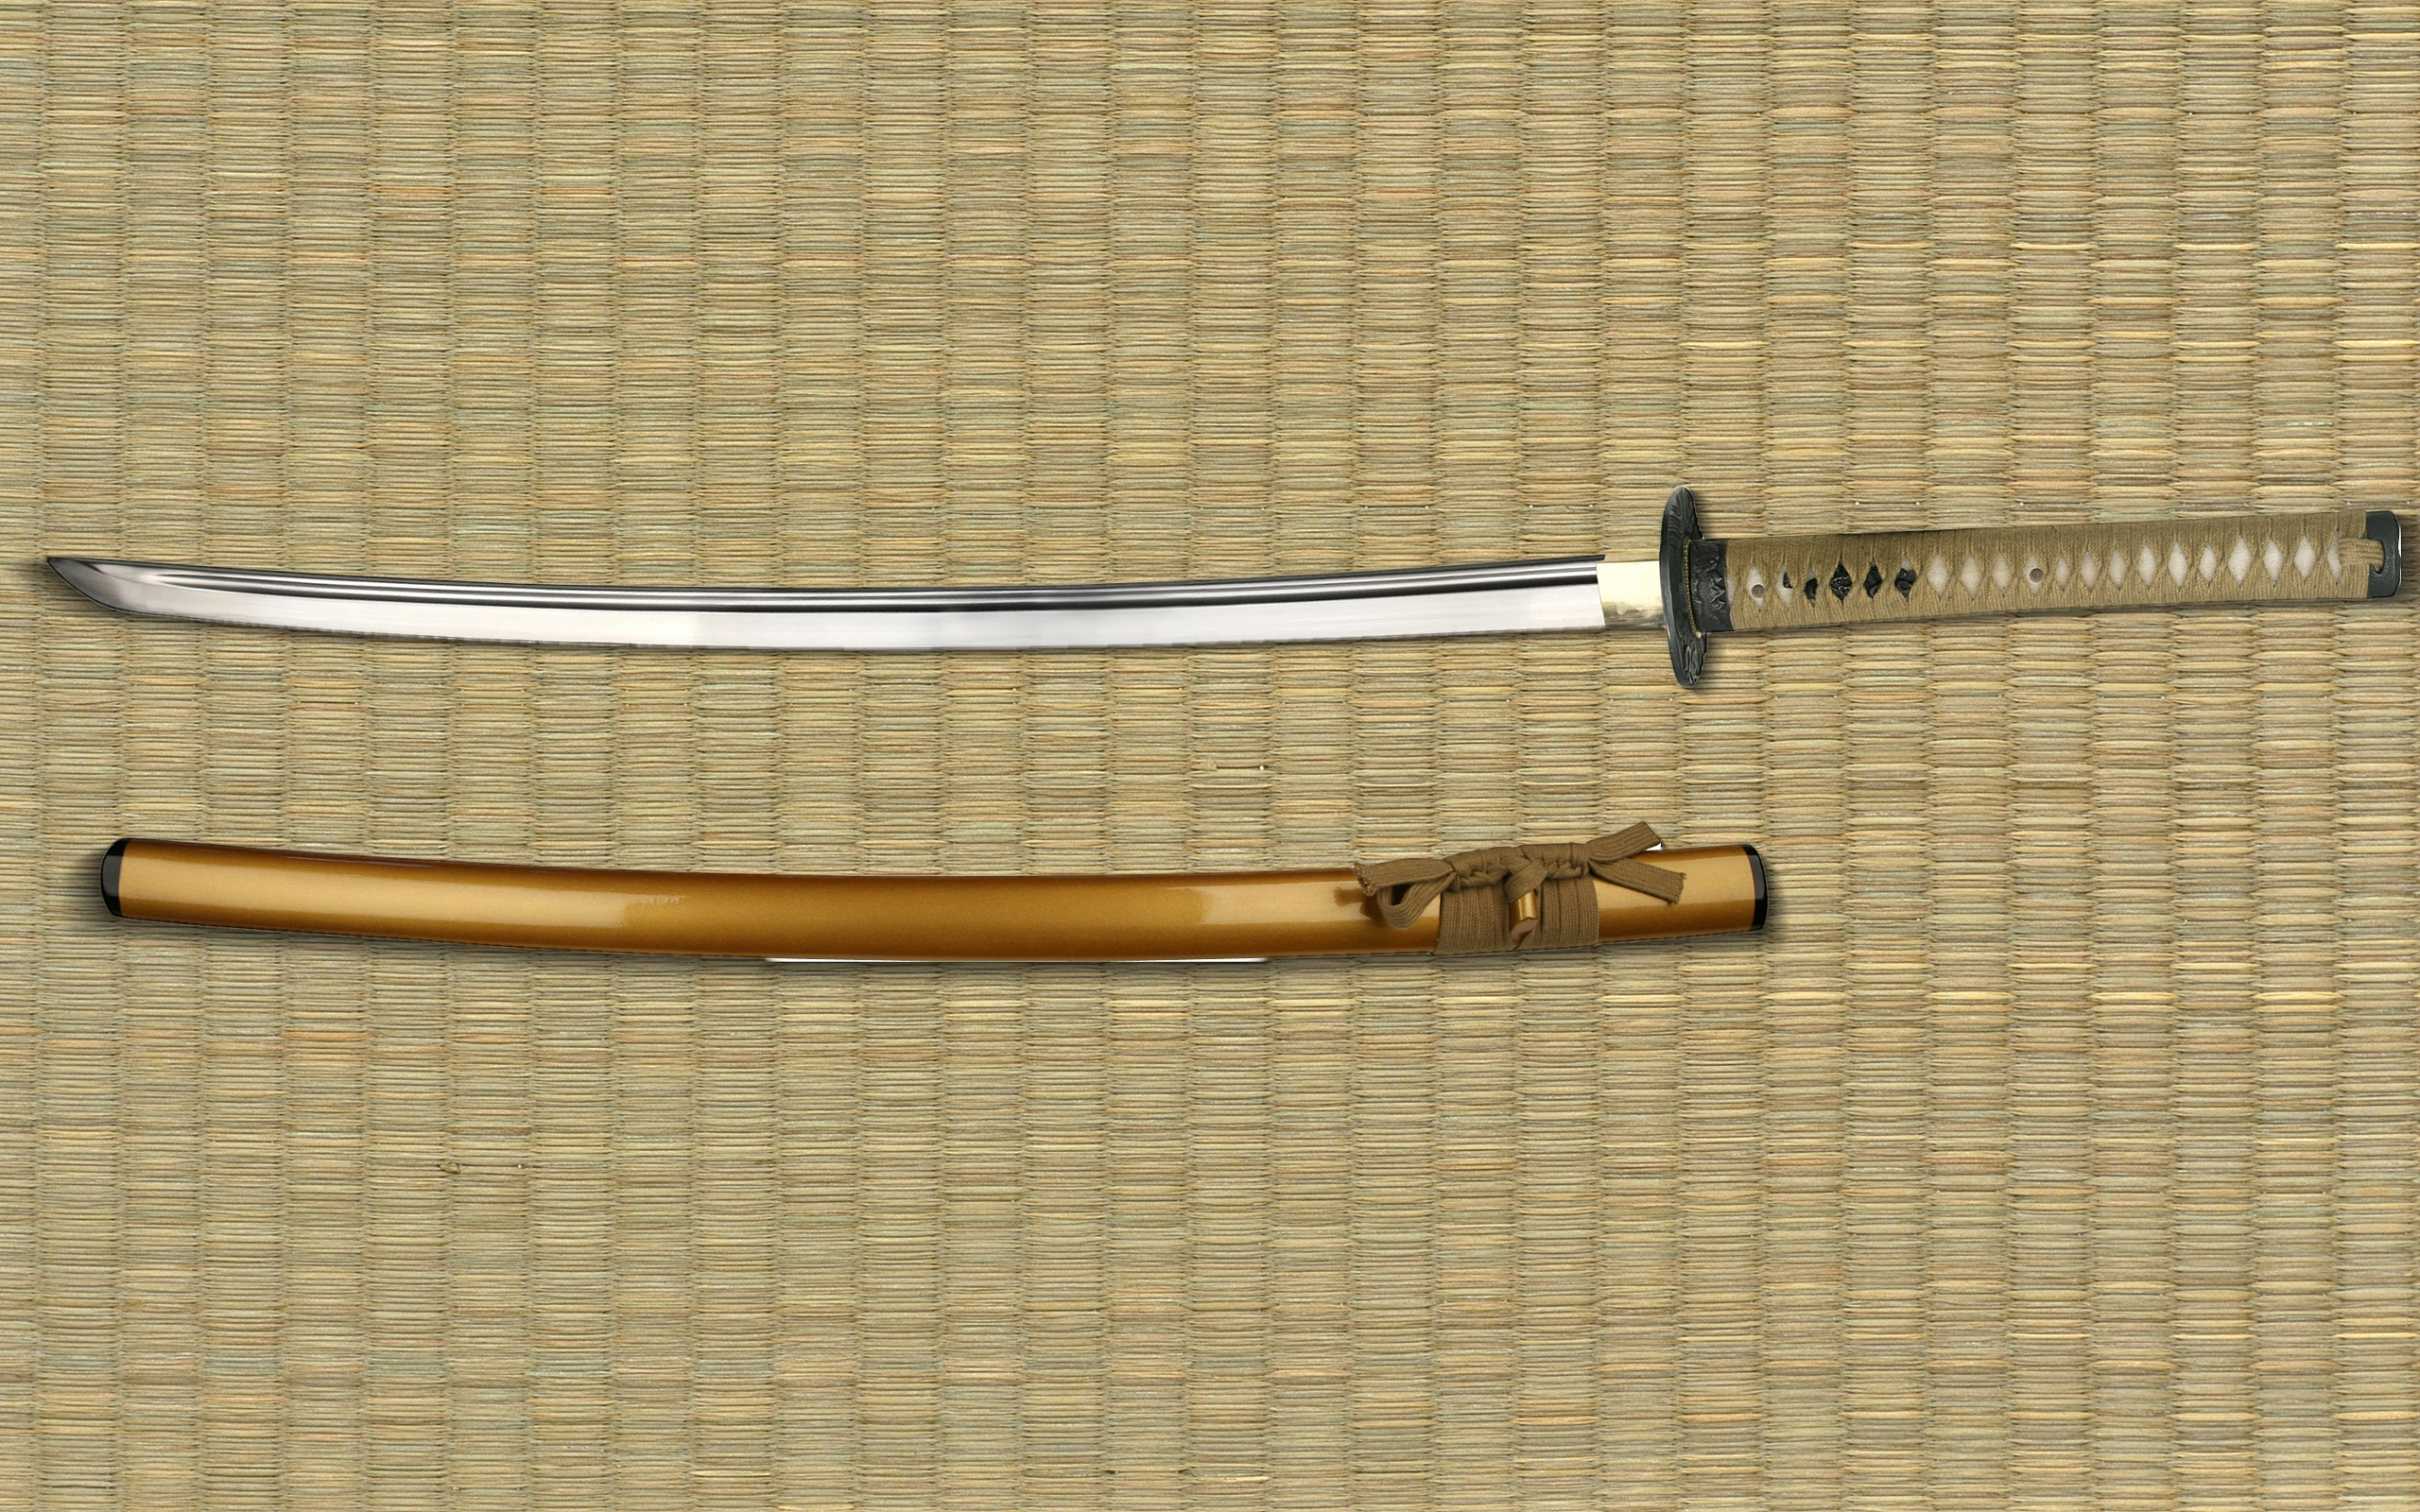 2560x1600 Samurai sword HD Wallpapers and Backgrounds